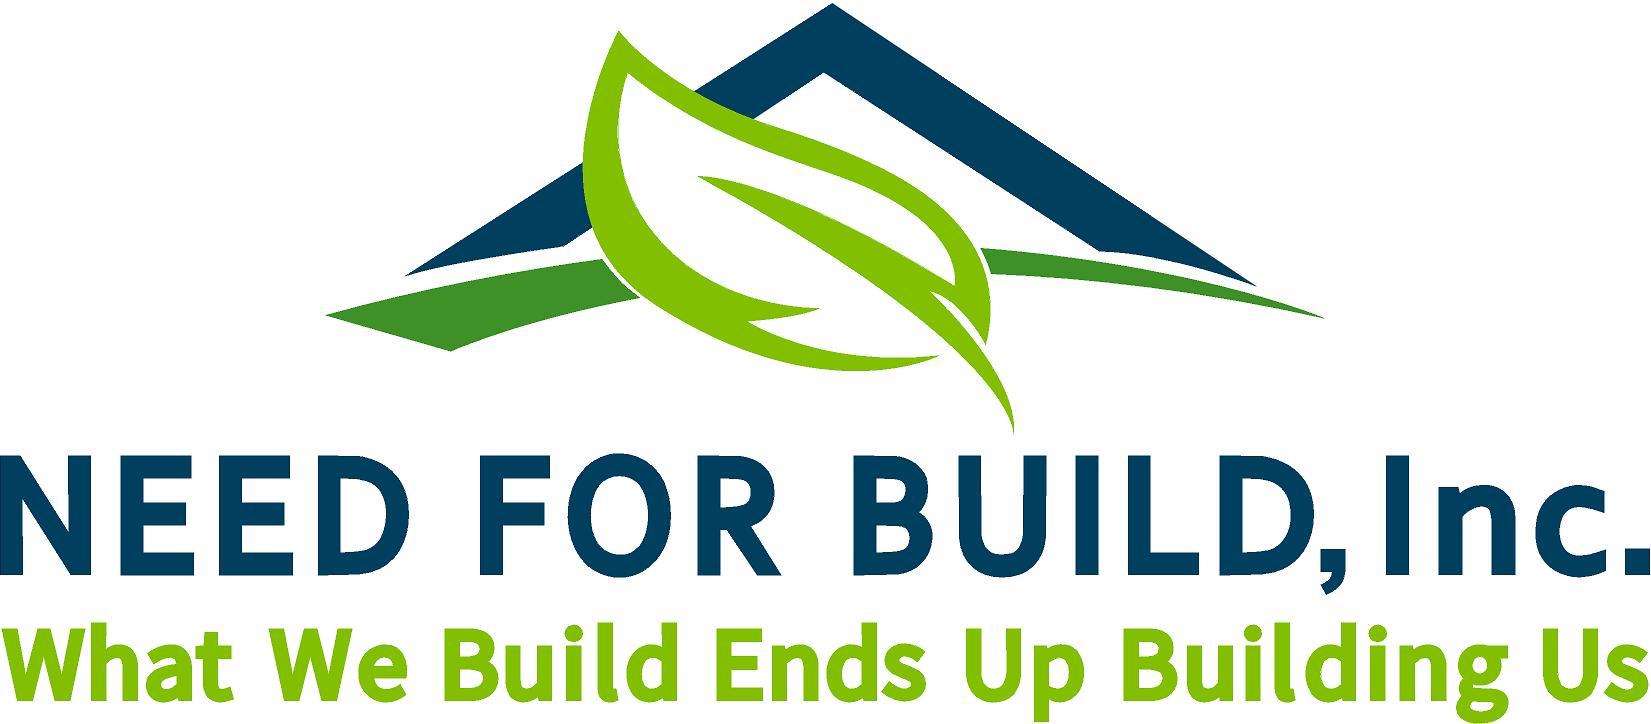 Need For Build Inc logo